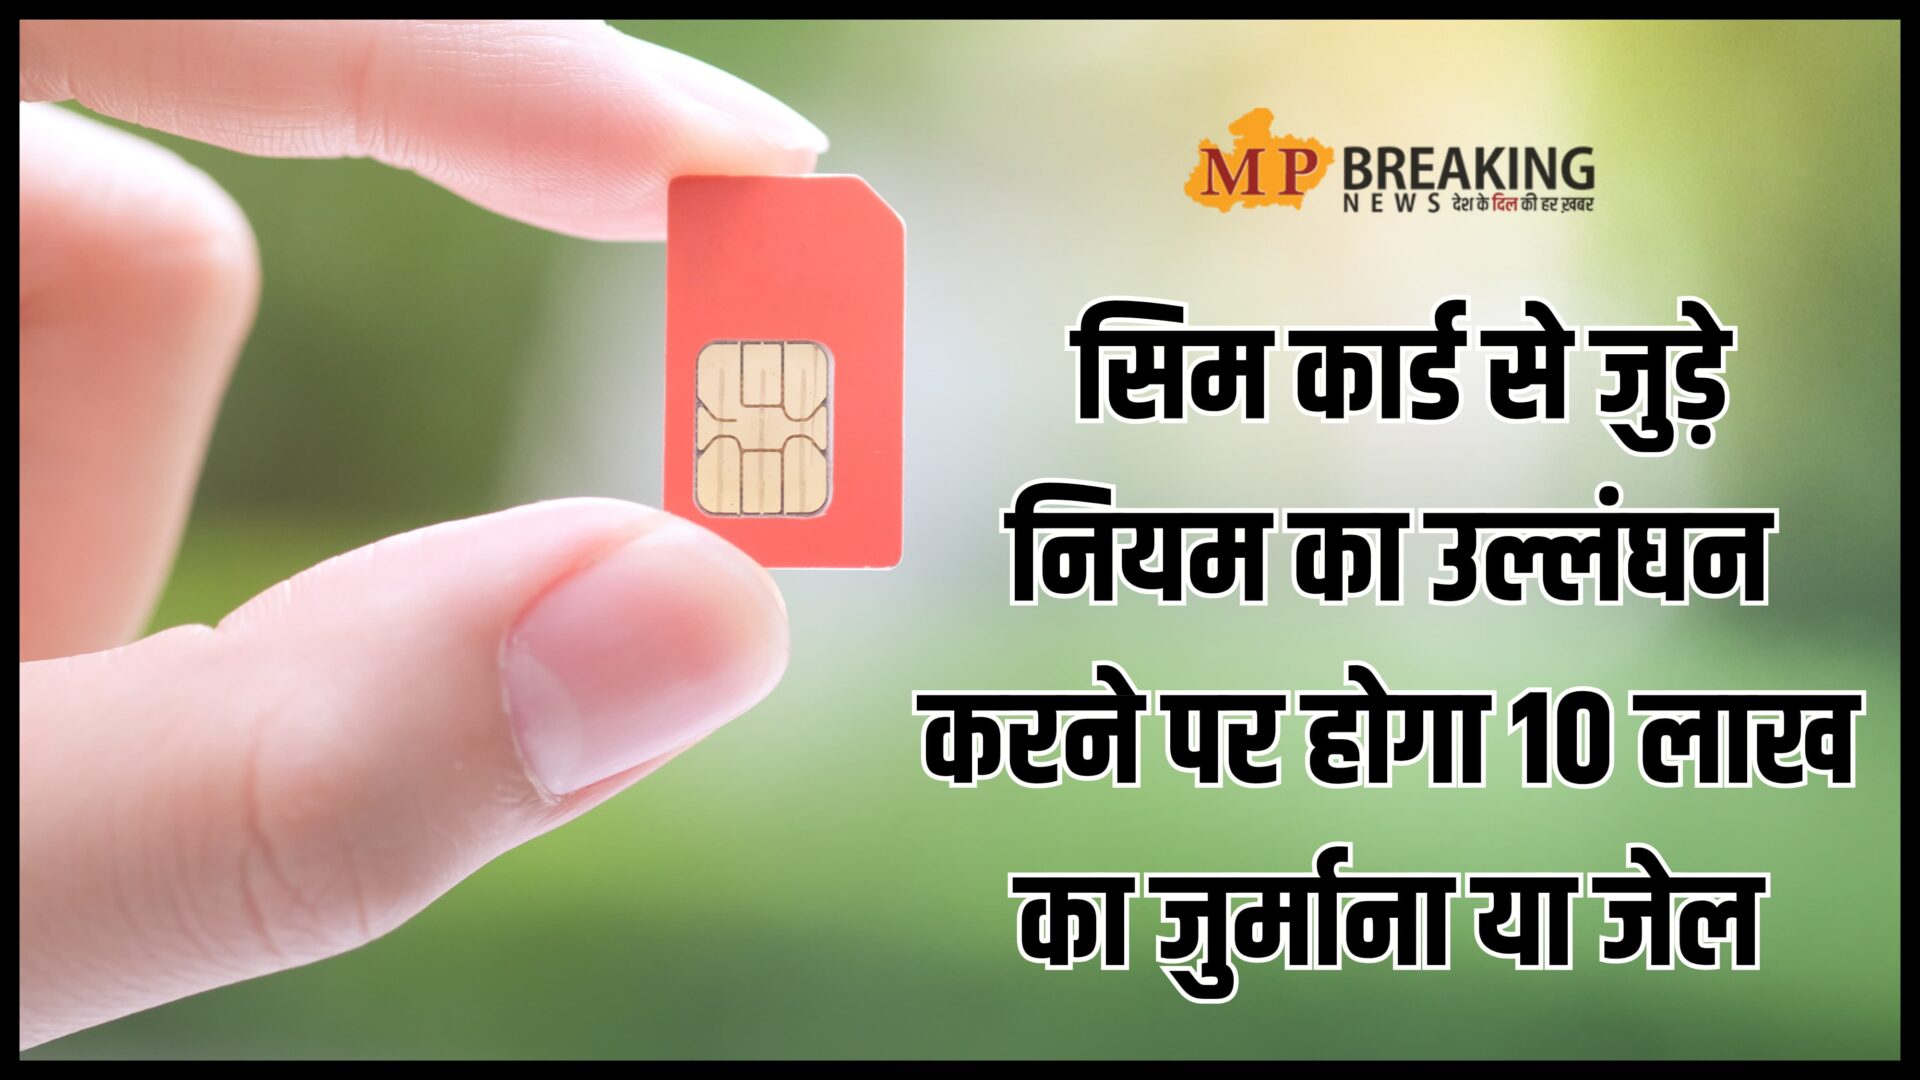 New rules related to SIM card